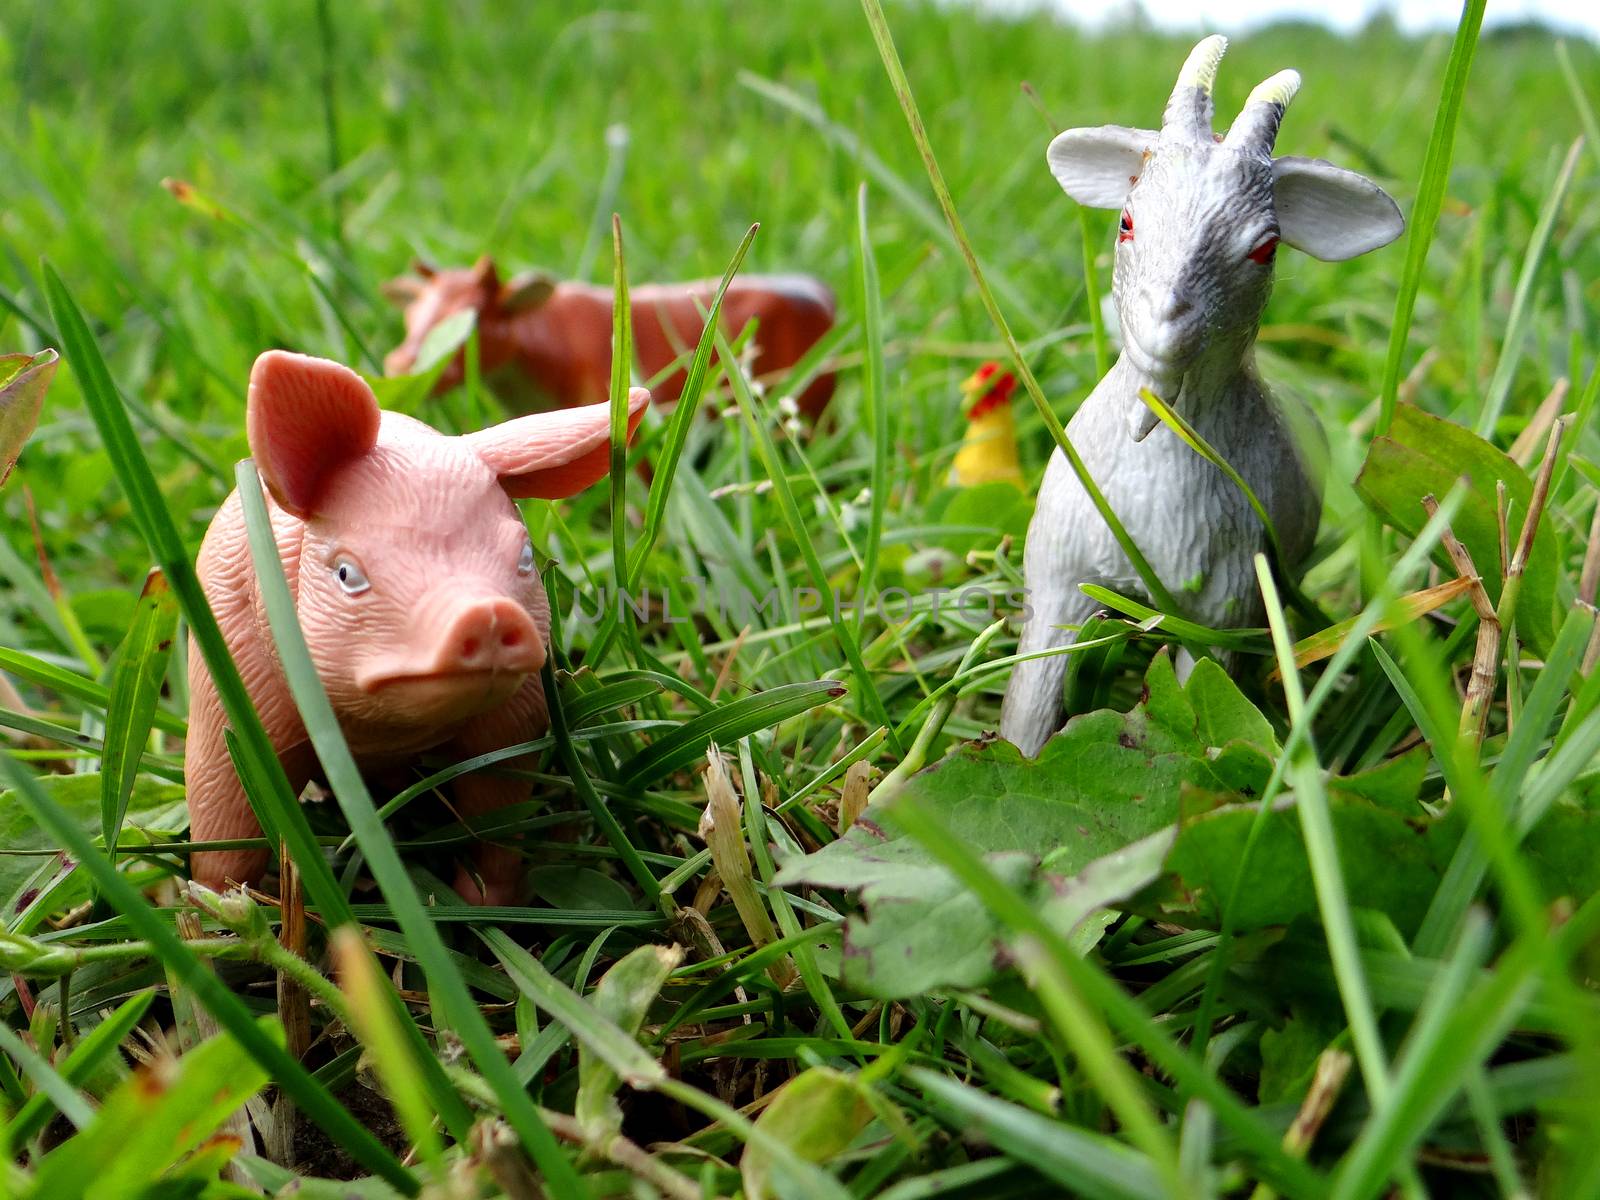 Miniature toy farm animals in the grass by natali_brill